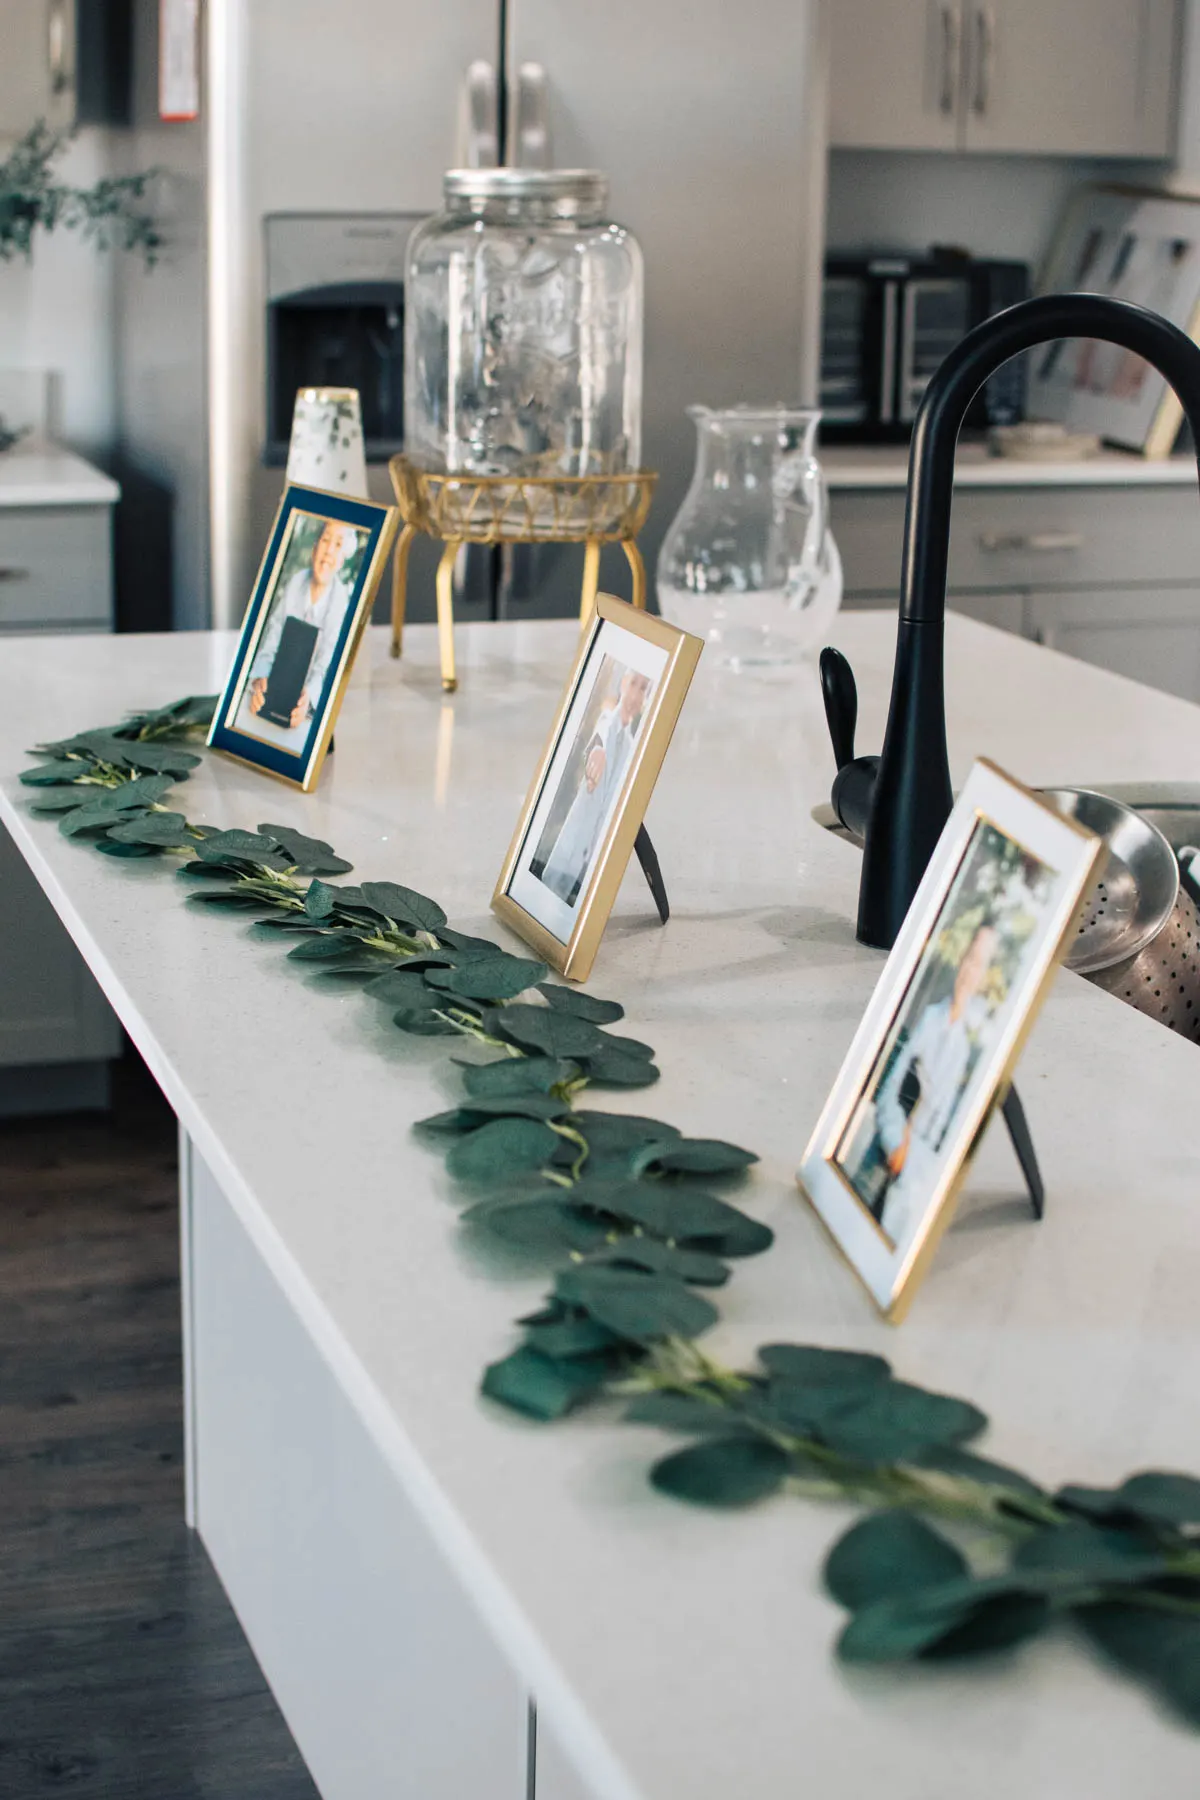 Three baptism picture frames on kitchen counter with eucalyptus garland in front.